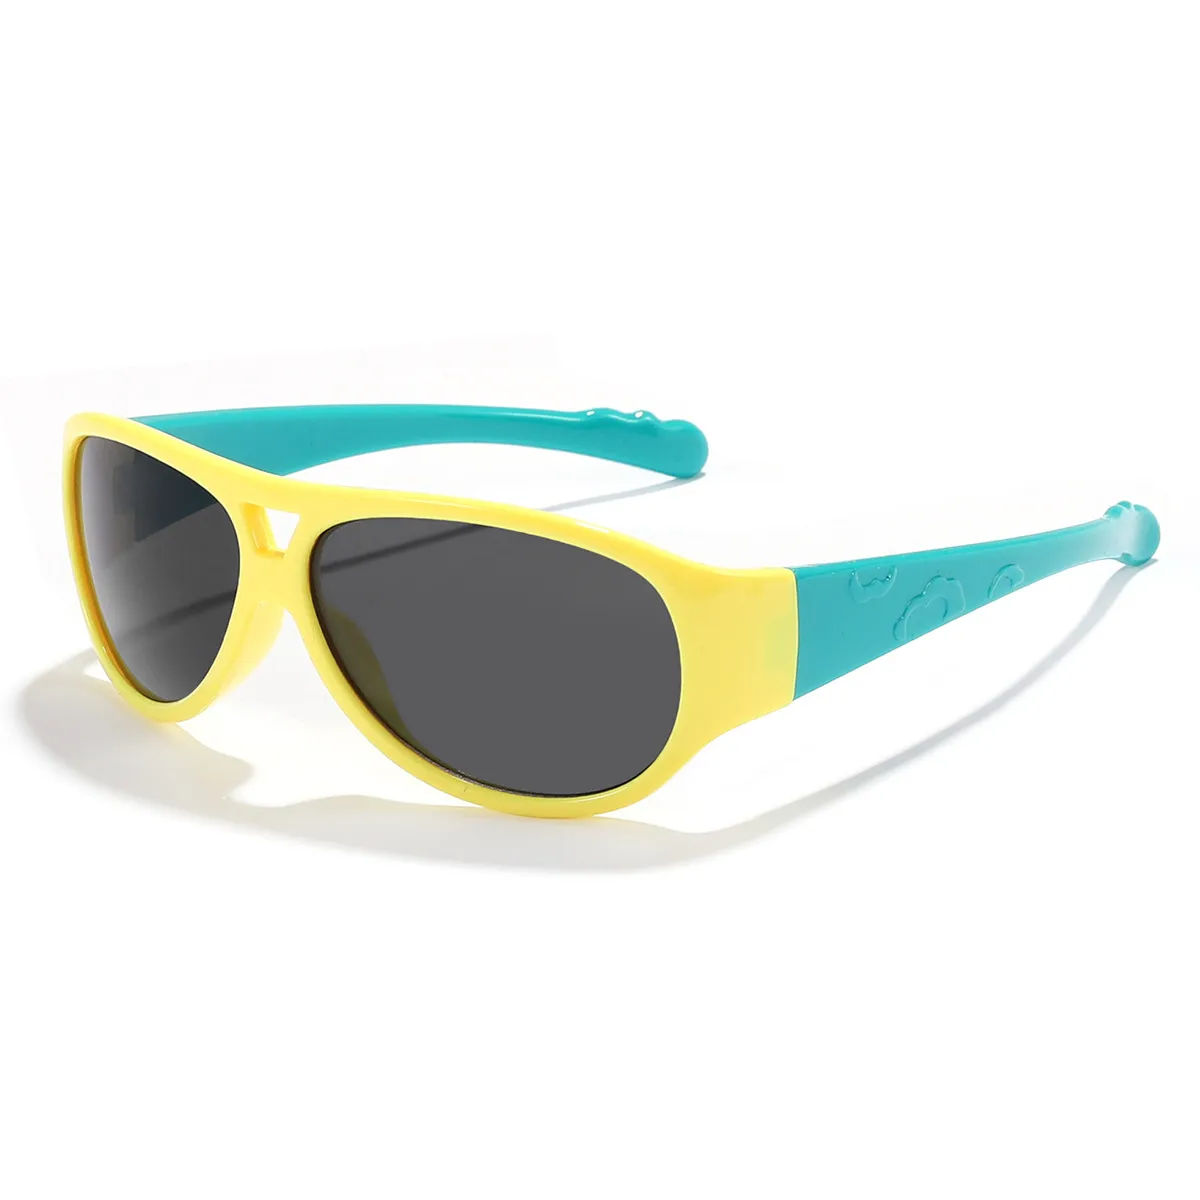 Toddler/Kid Double Beam Sunglasses (with Glasses Case)